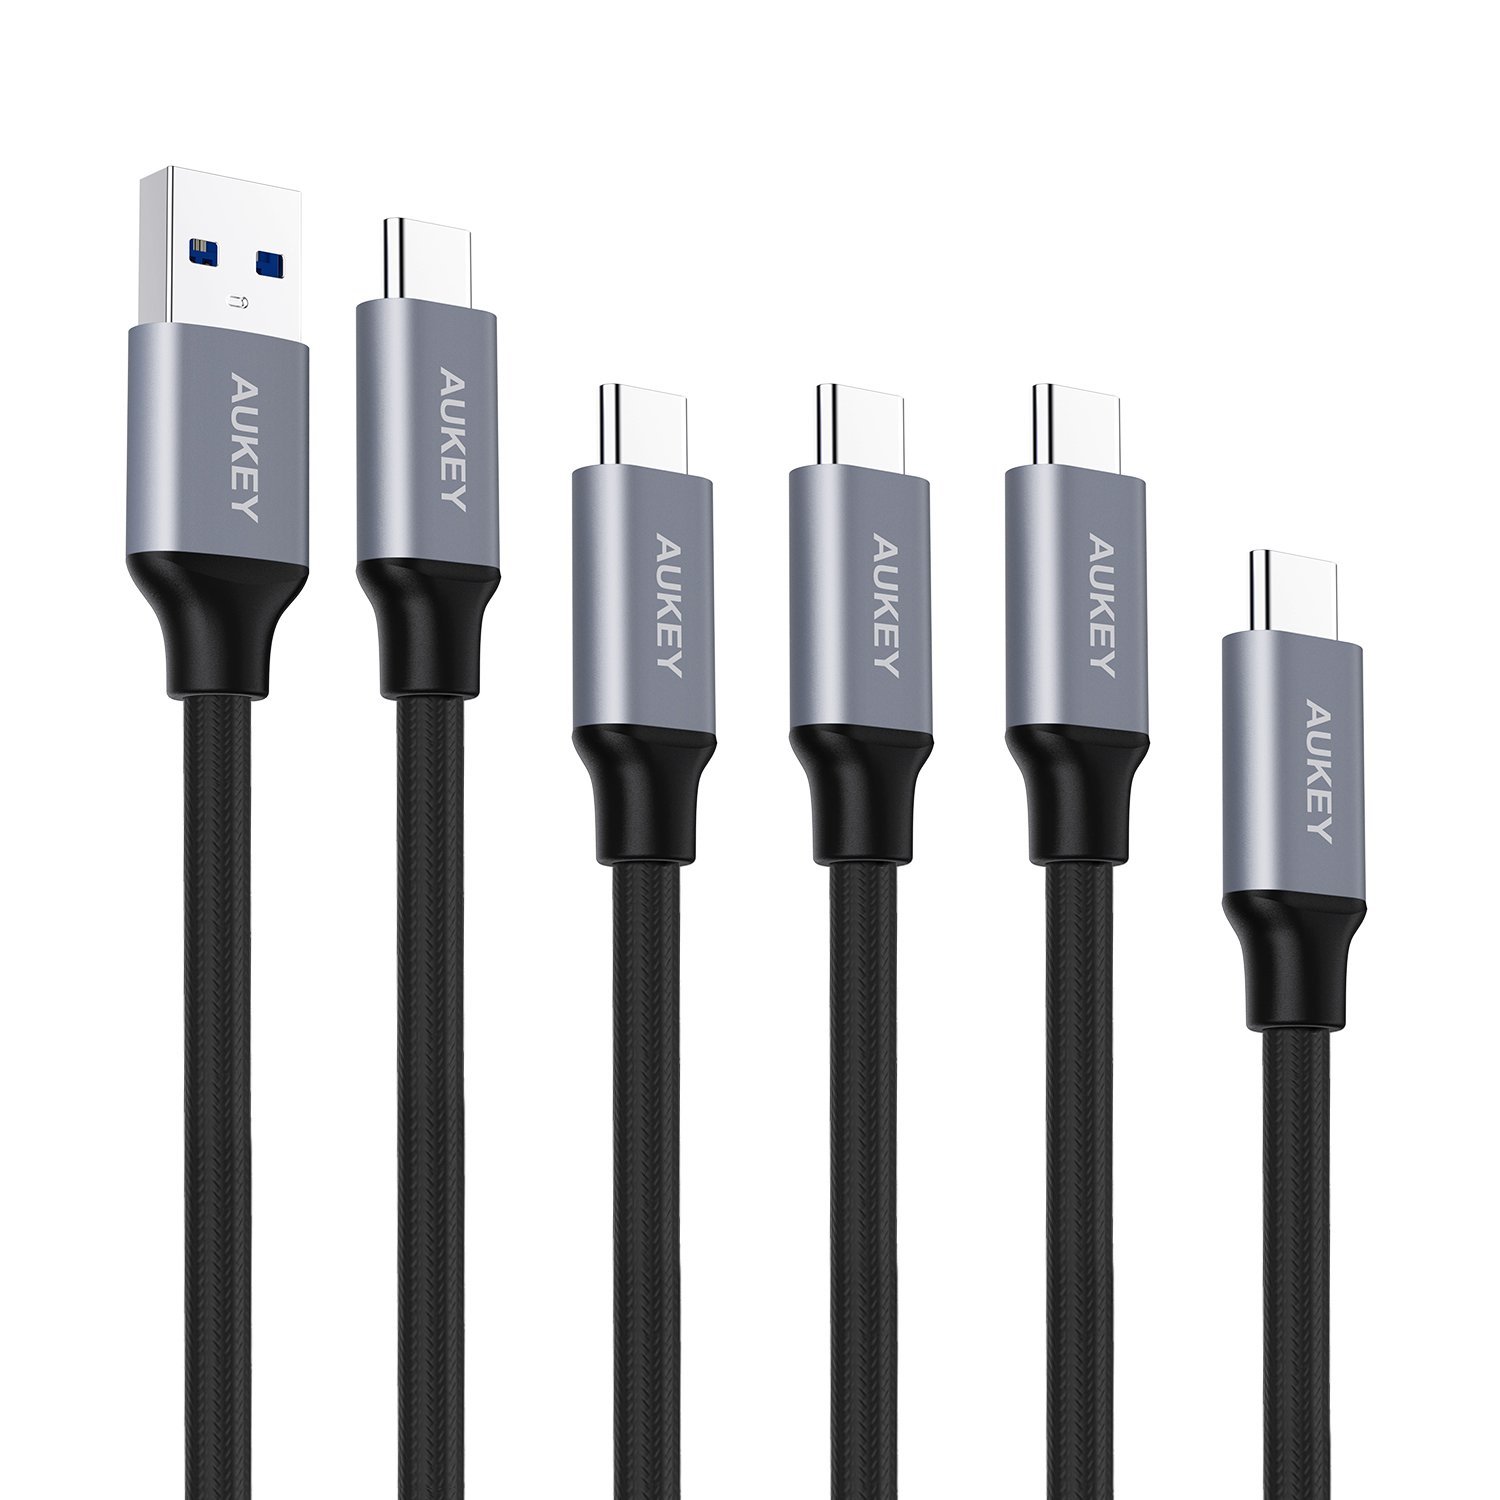 Aukey USB C fast charge 3.0 cable 5-pack for $16